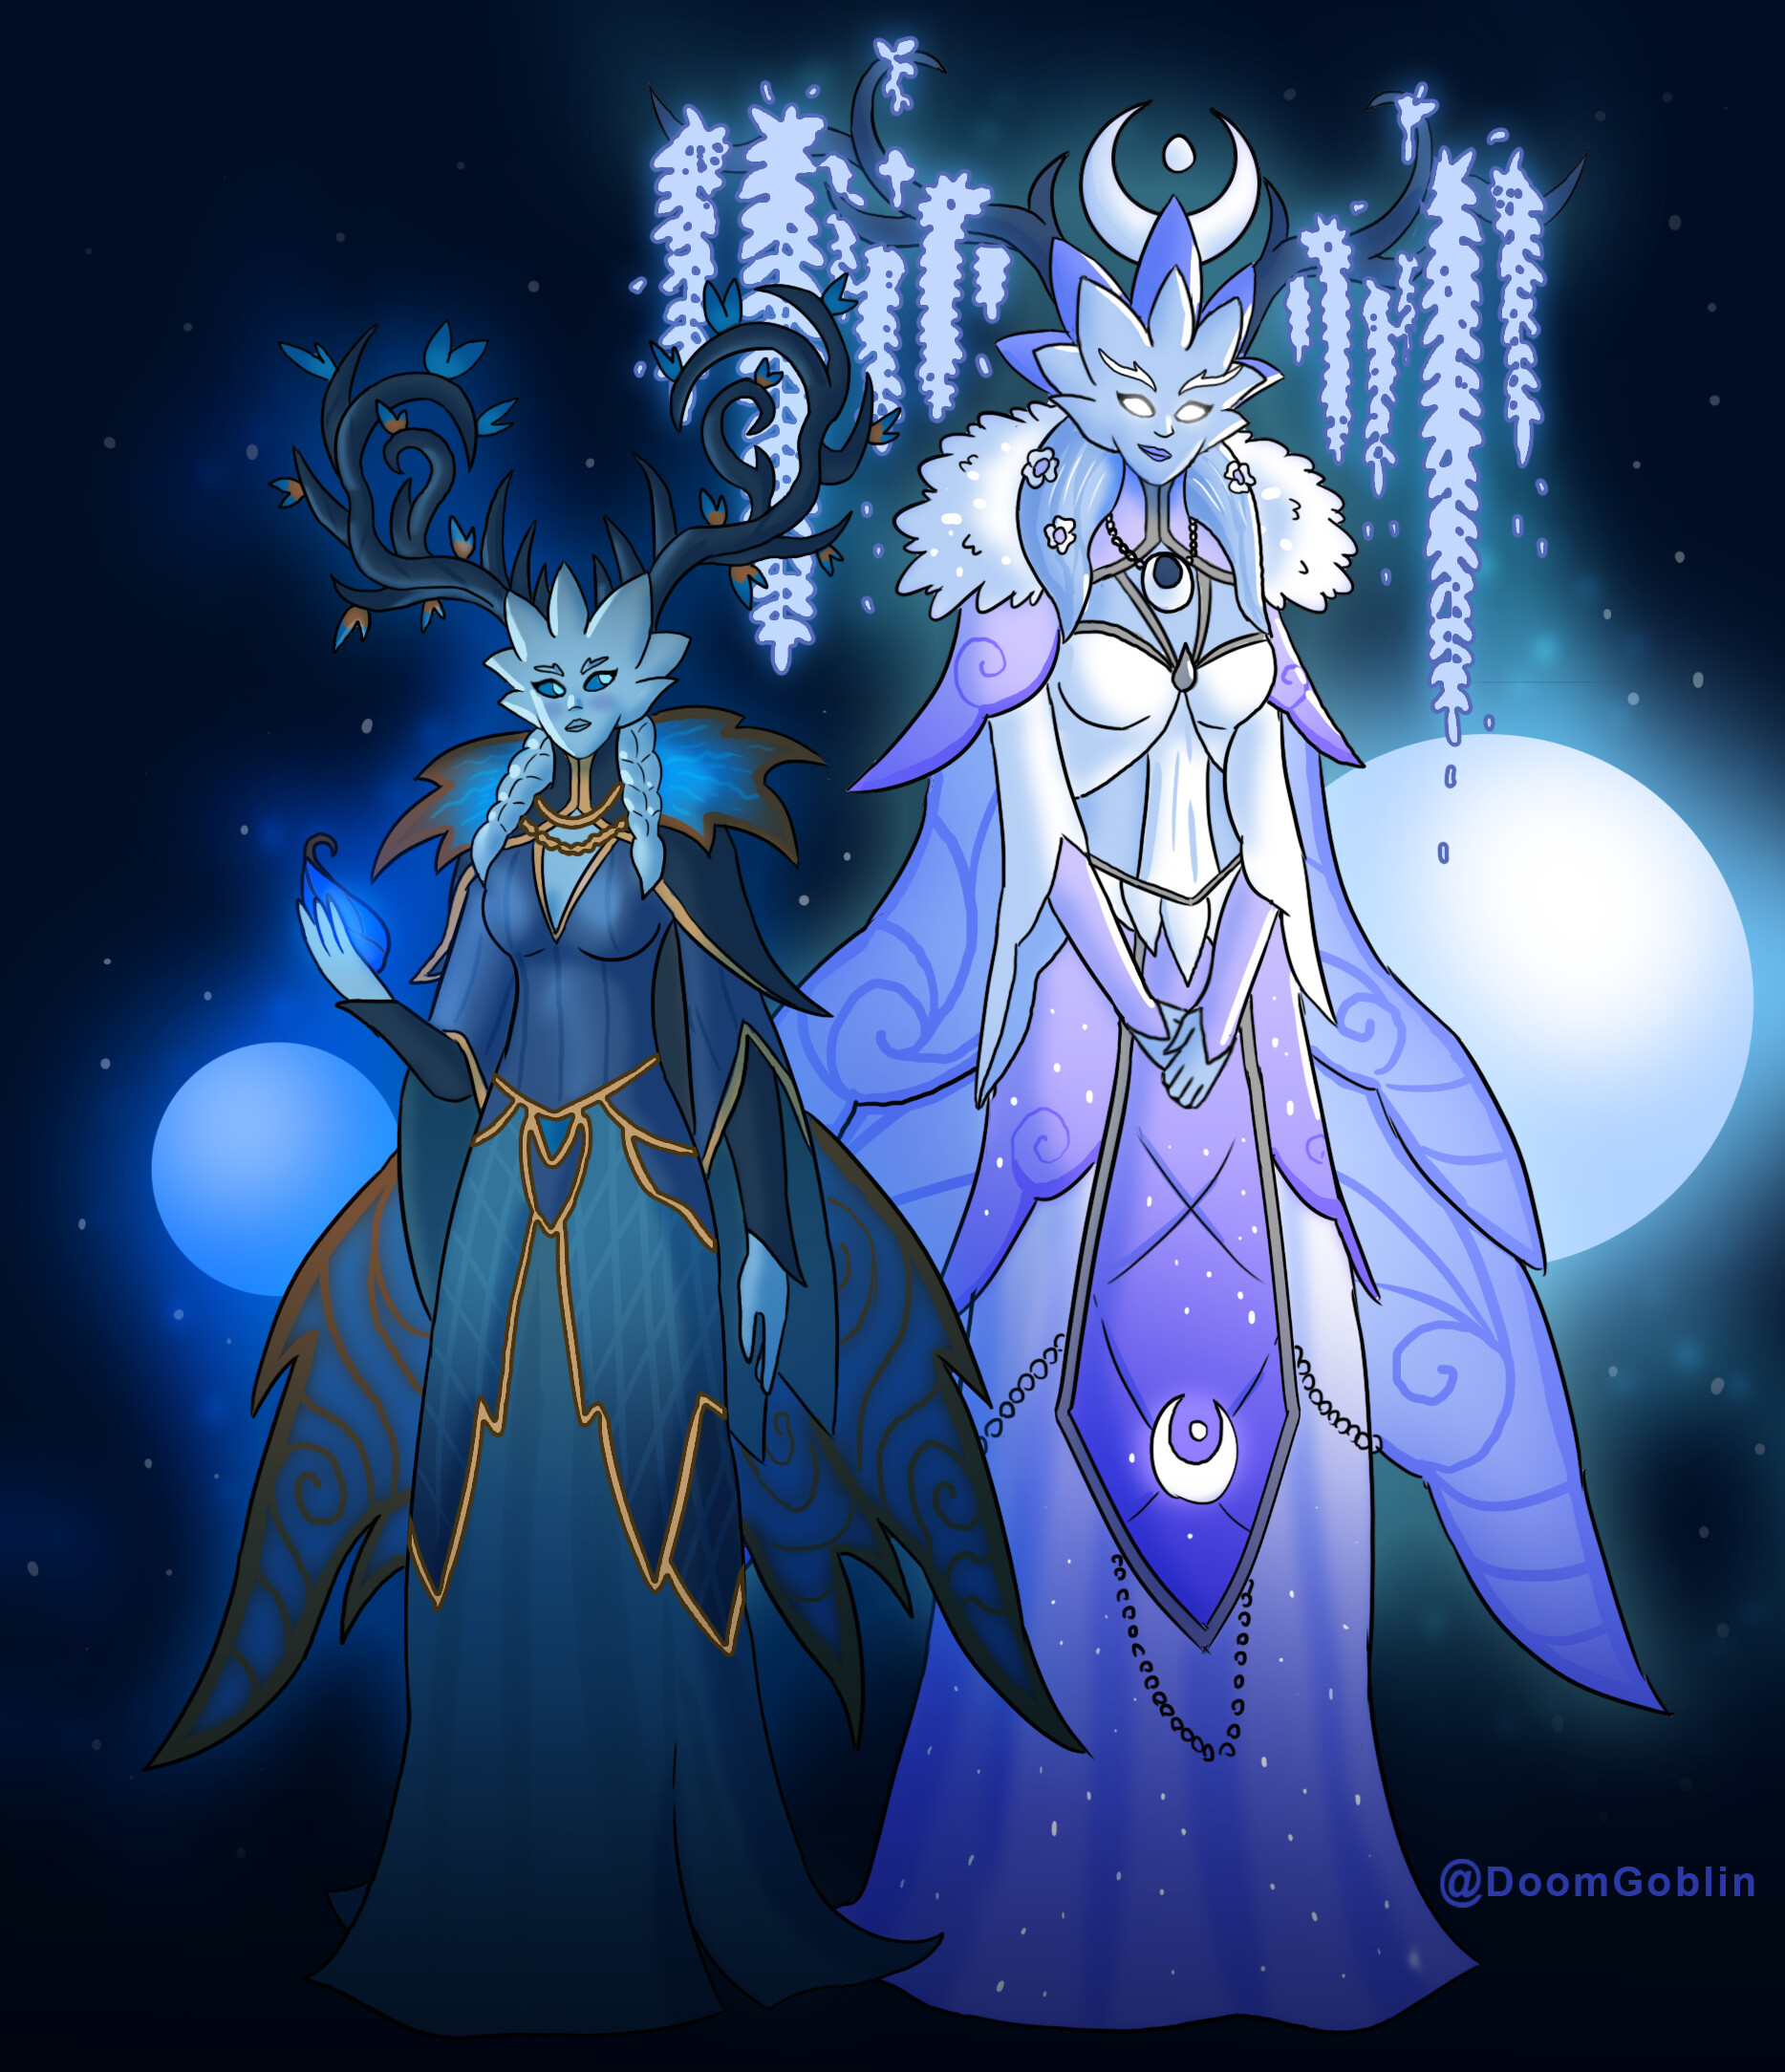 Two moon sisters: The Blue Child(The Winter Queen) and The White Lady(Elune...